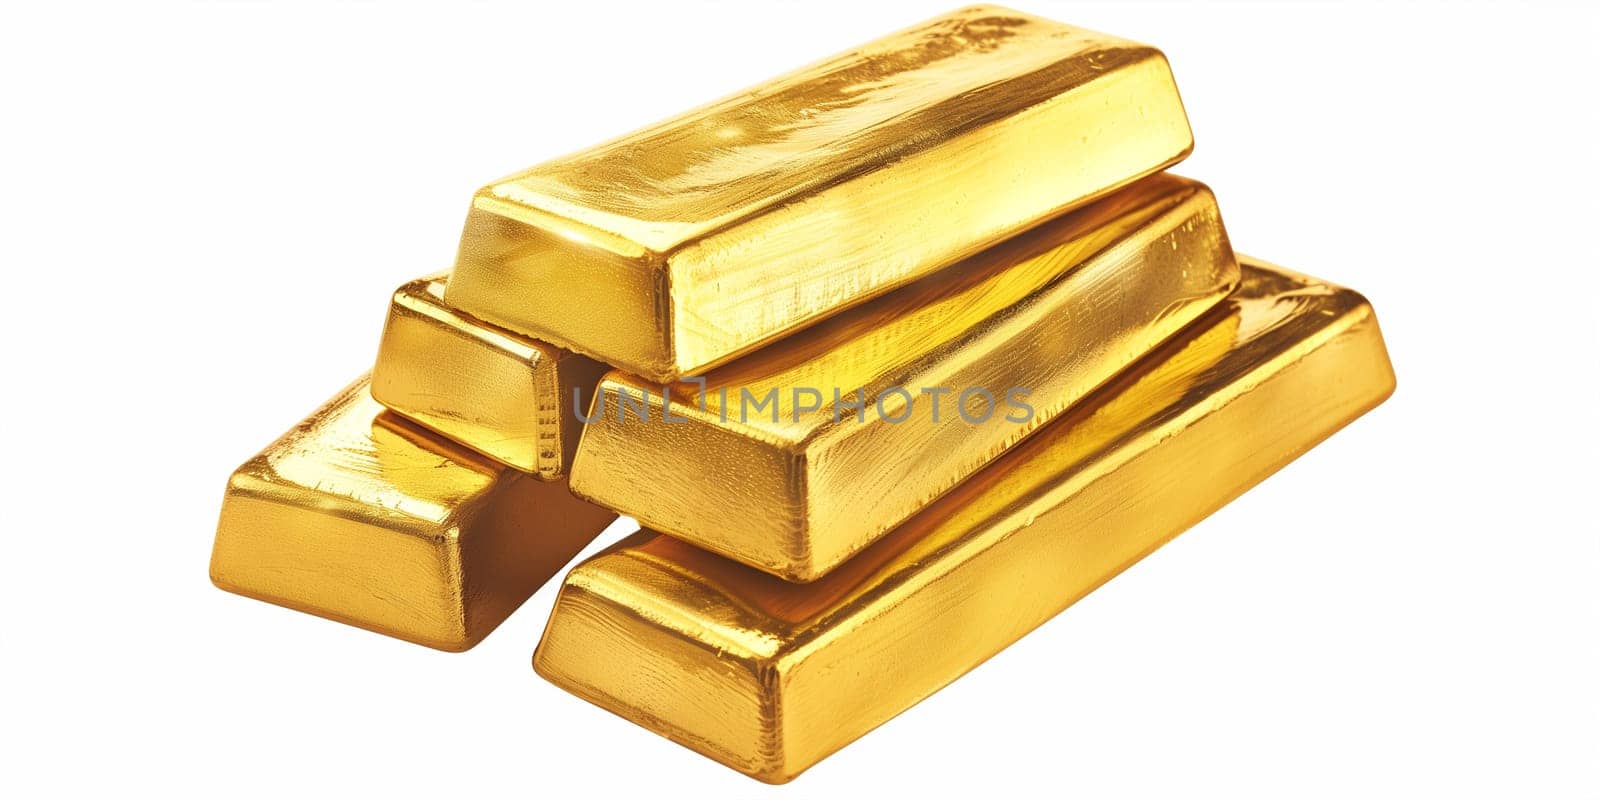 A stack of gold bars is neatly aligned on top of each other, showcasing their shiny, metallic surfaces and uniform shape. The light reflects off the bars, emphasizing their value and weight.